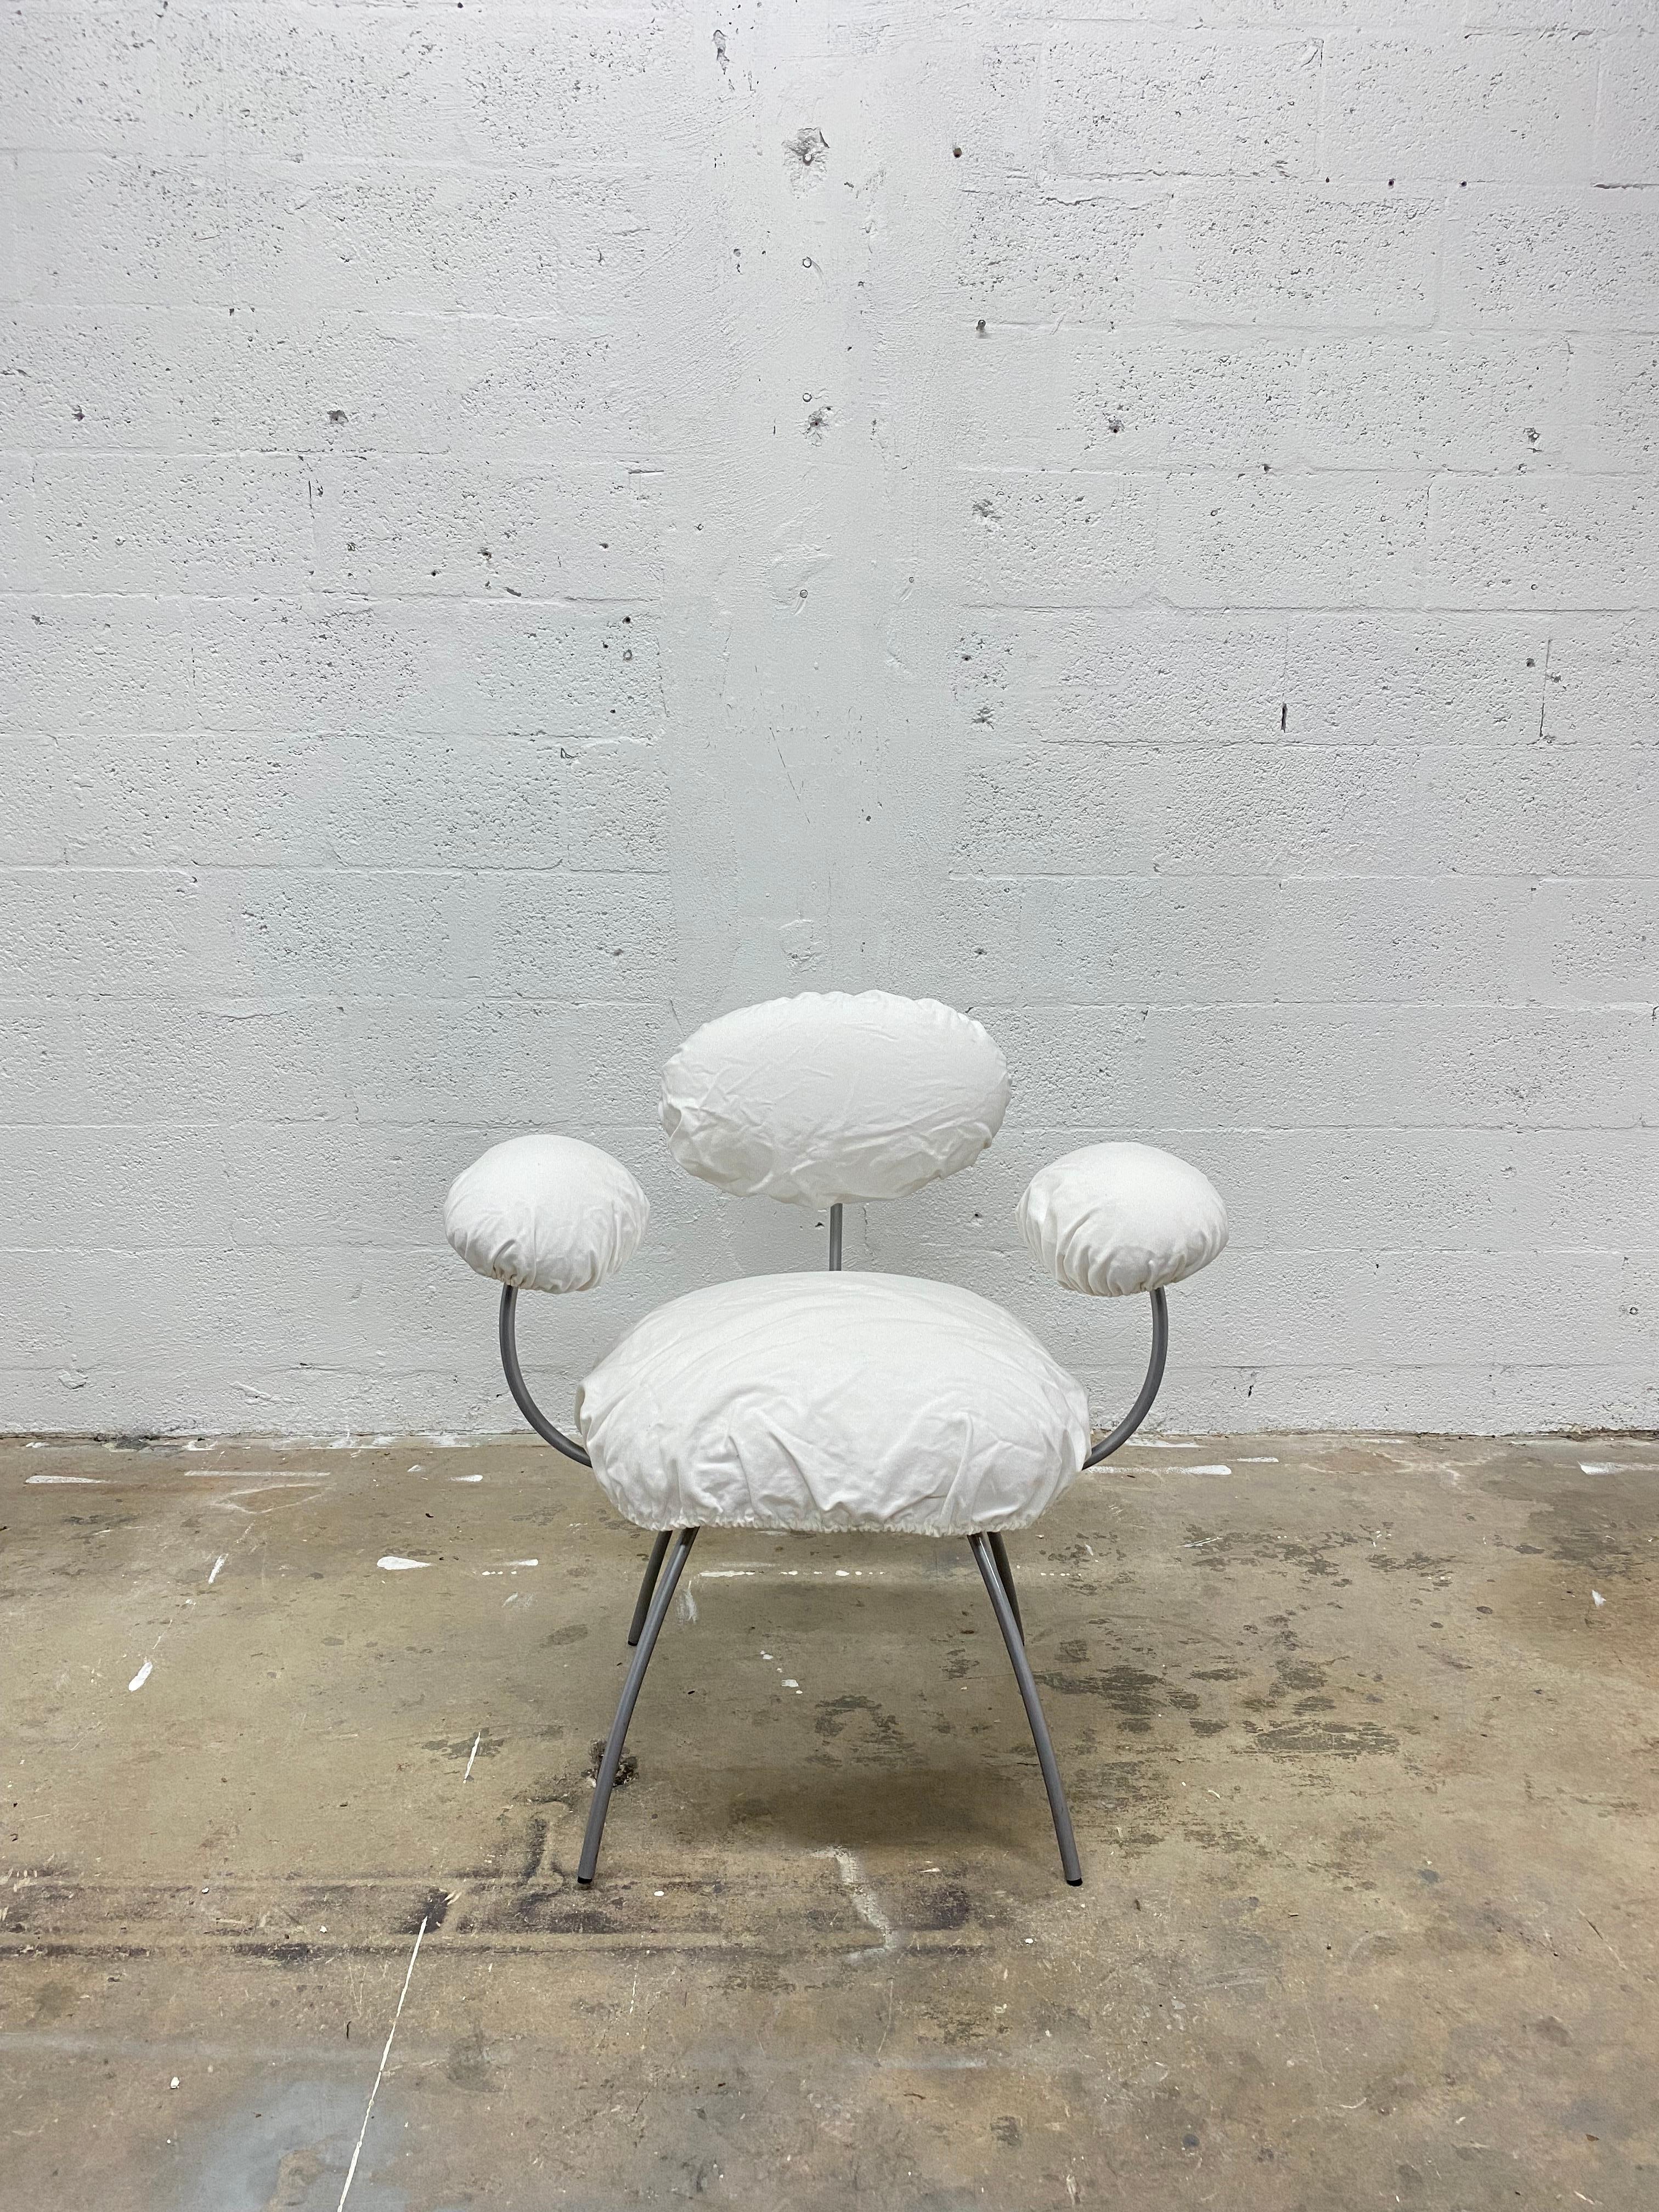 Single Saint James dining arm chair with white linen slip covers by Jean Nouvel for Ligne Roset.

The frame is fully fabricated in aluminium-coated Epoxy-lacquered tempered steel. Feet have polyethylene castors. Backrest, armrest and seat cushion